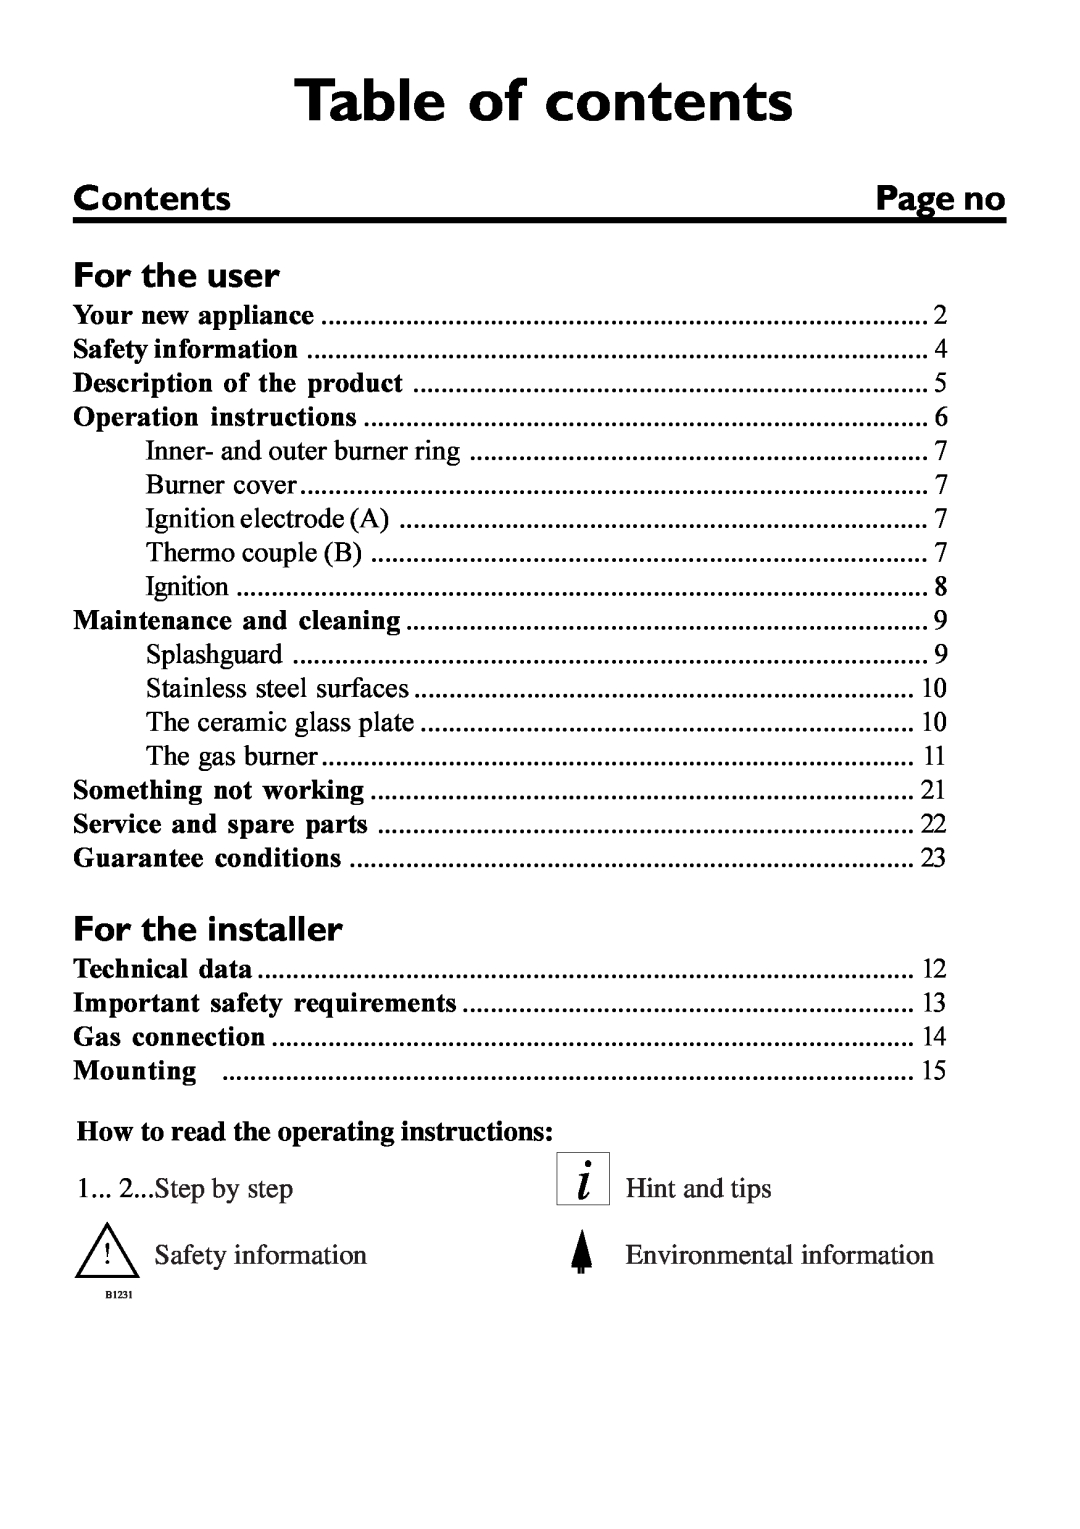 Electrolux 6561 G-m GB manual Table of contents, How to read the operating instructions, Contents, For the user, Page no 